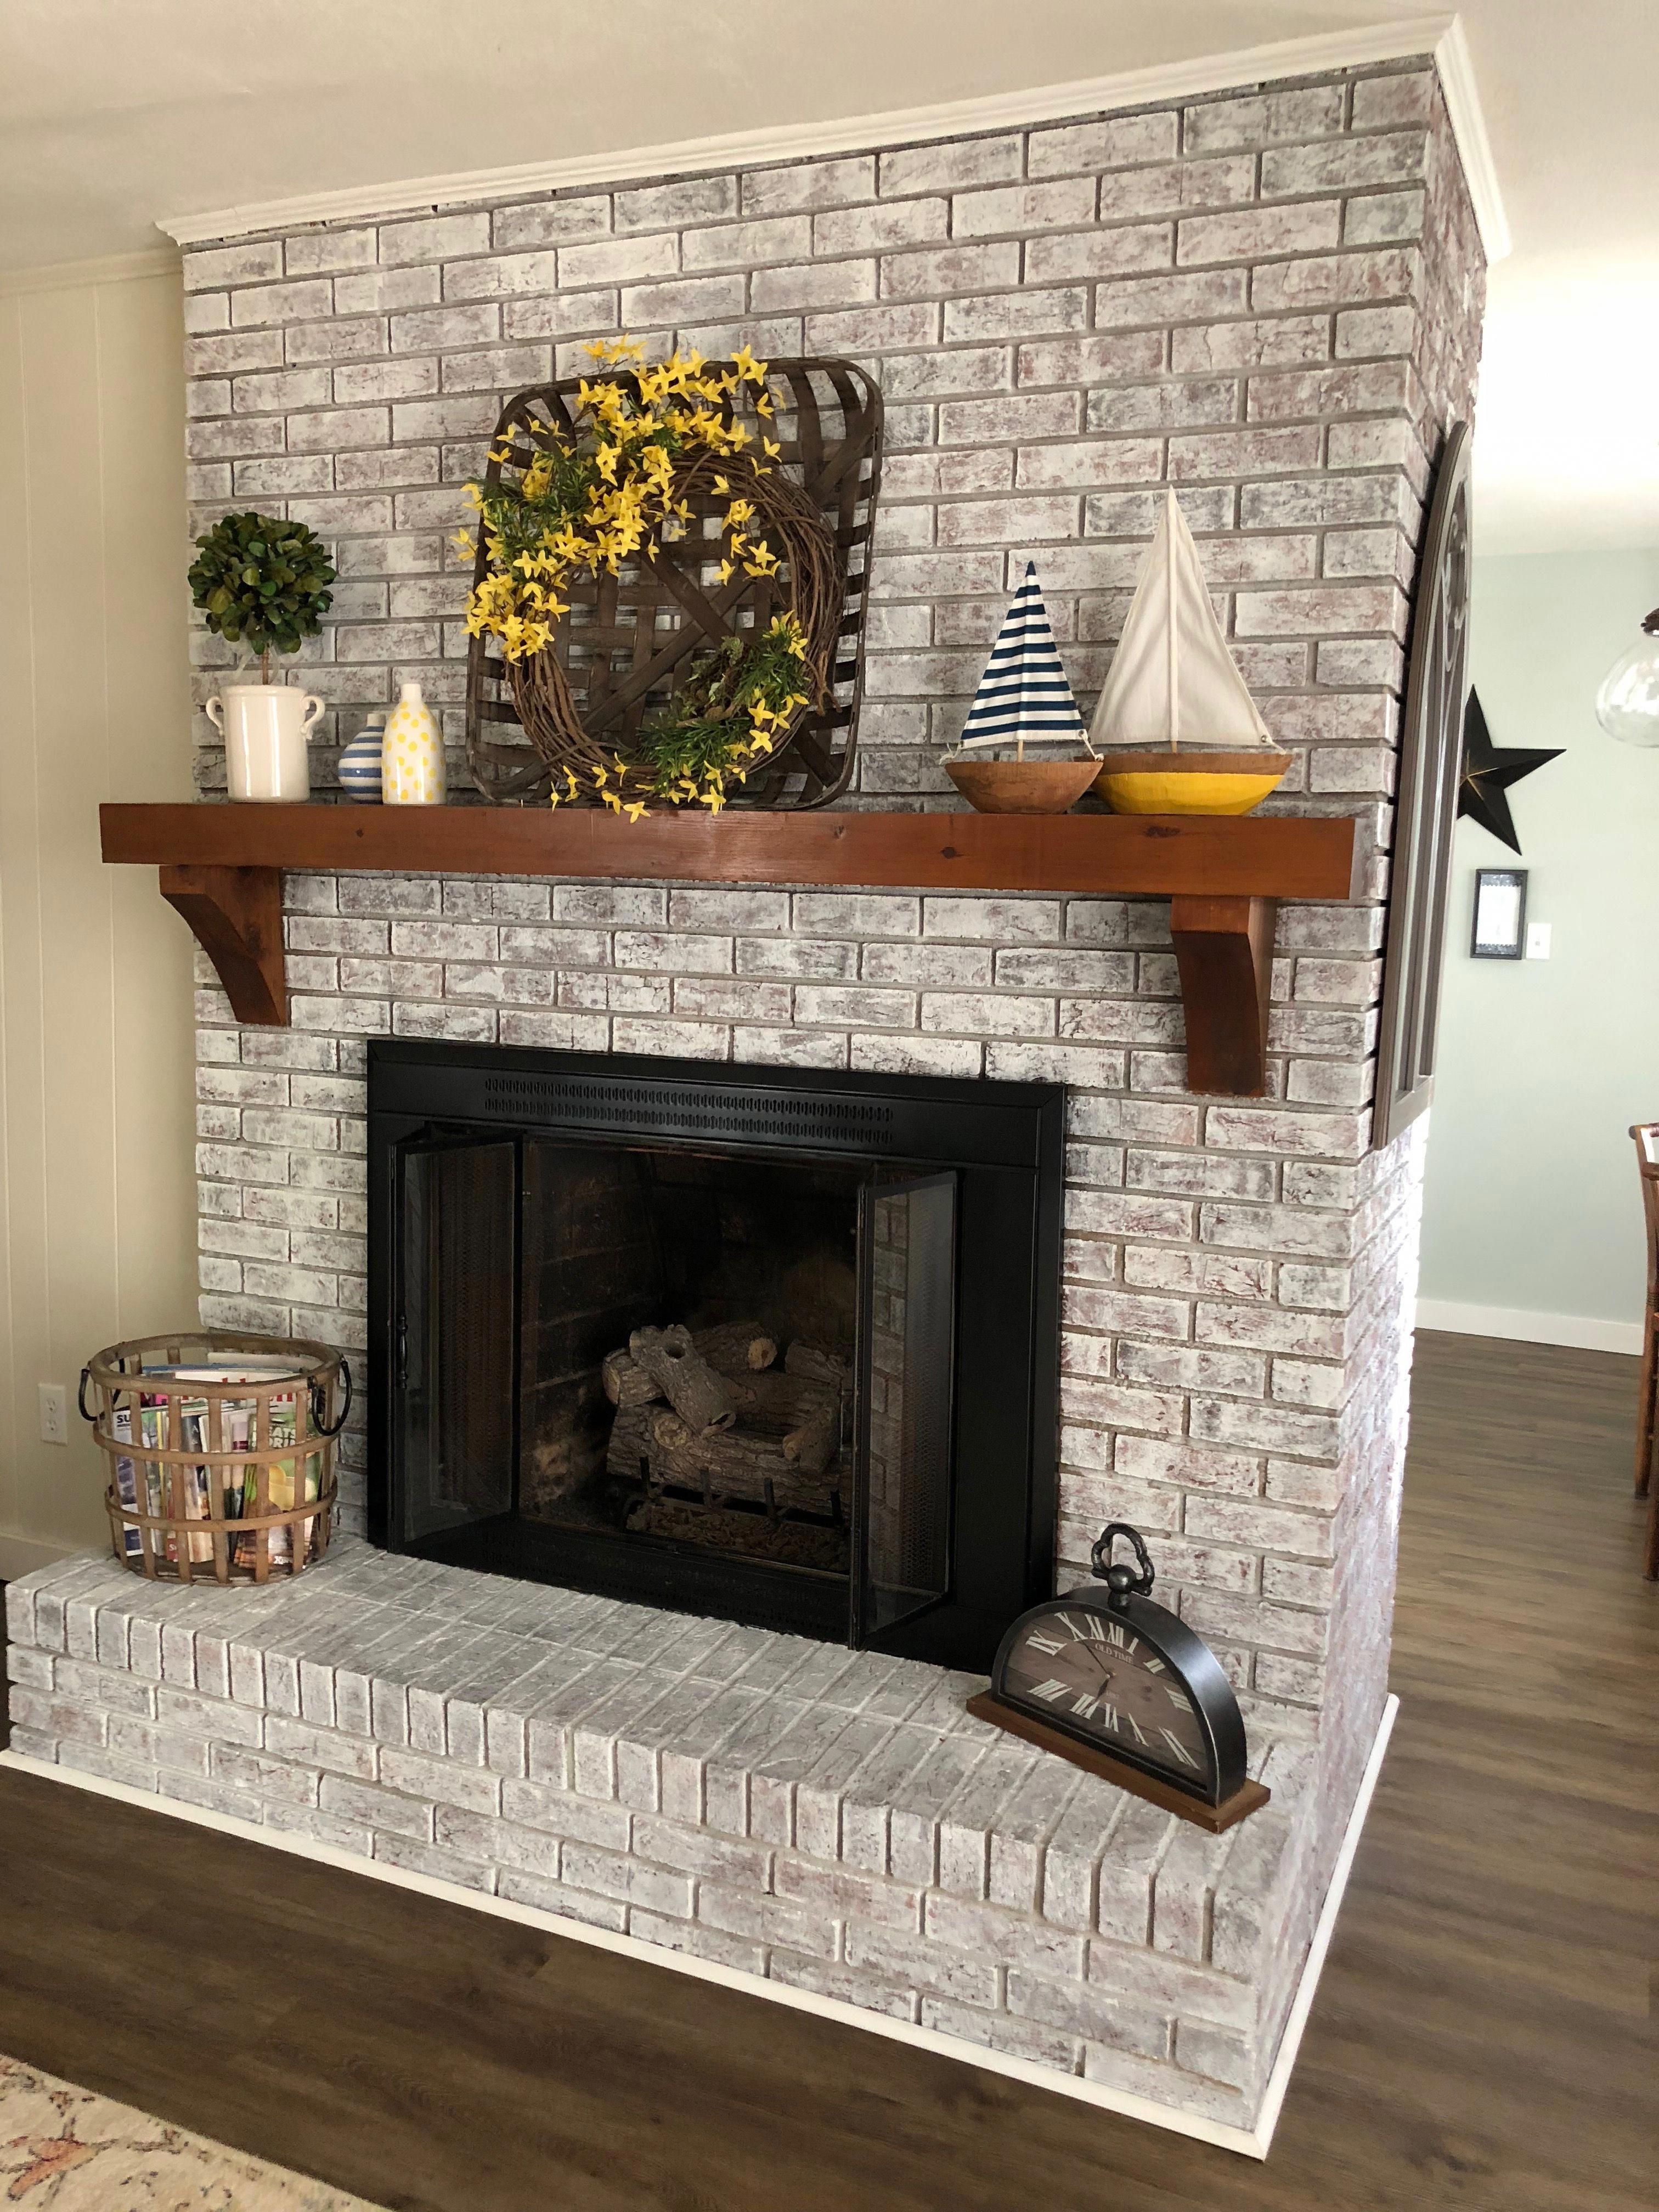 What Color to Paint Fireplace Surround Unique Painted Brick Fireplace Sw Pure White Over Dark Red Brick